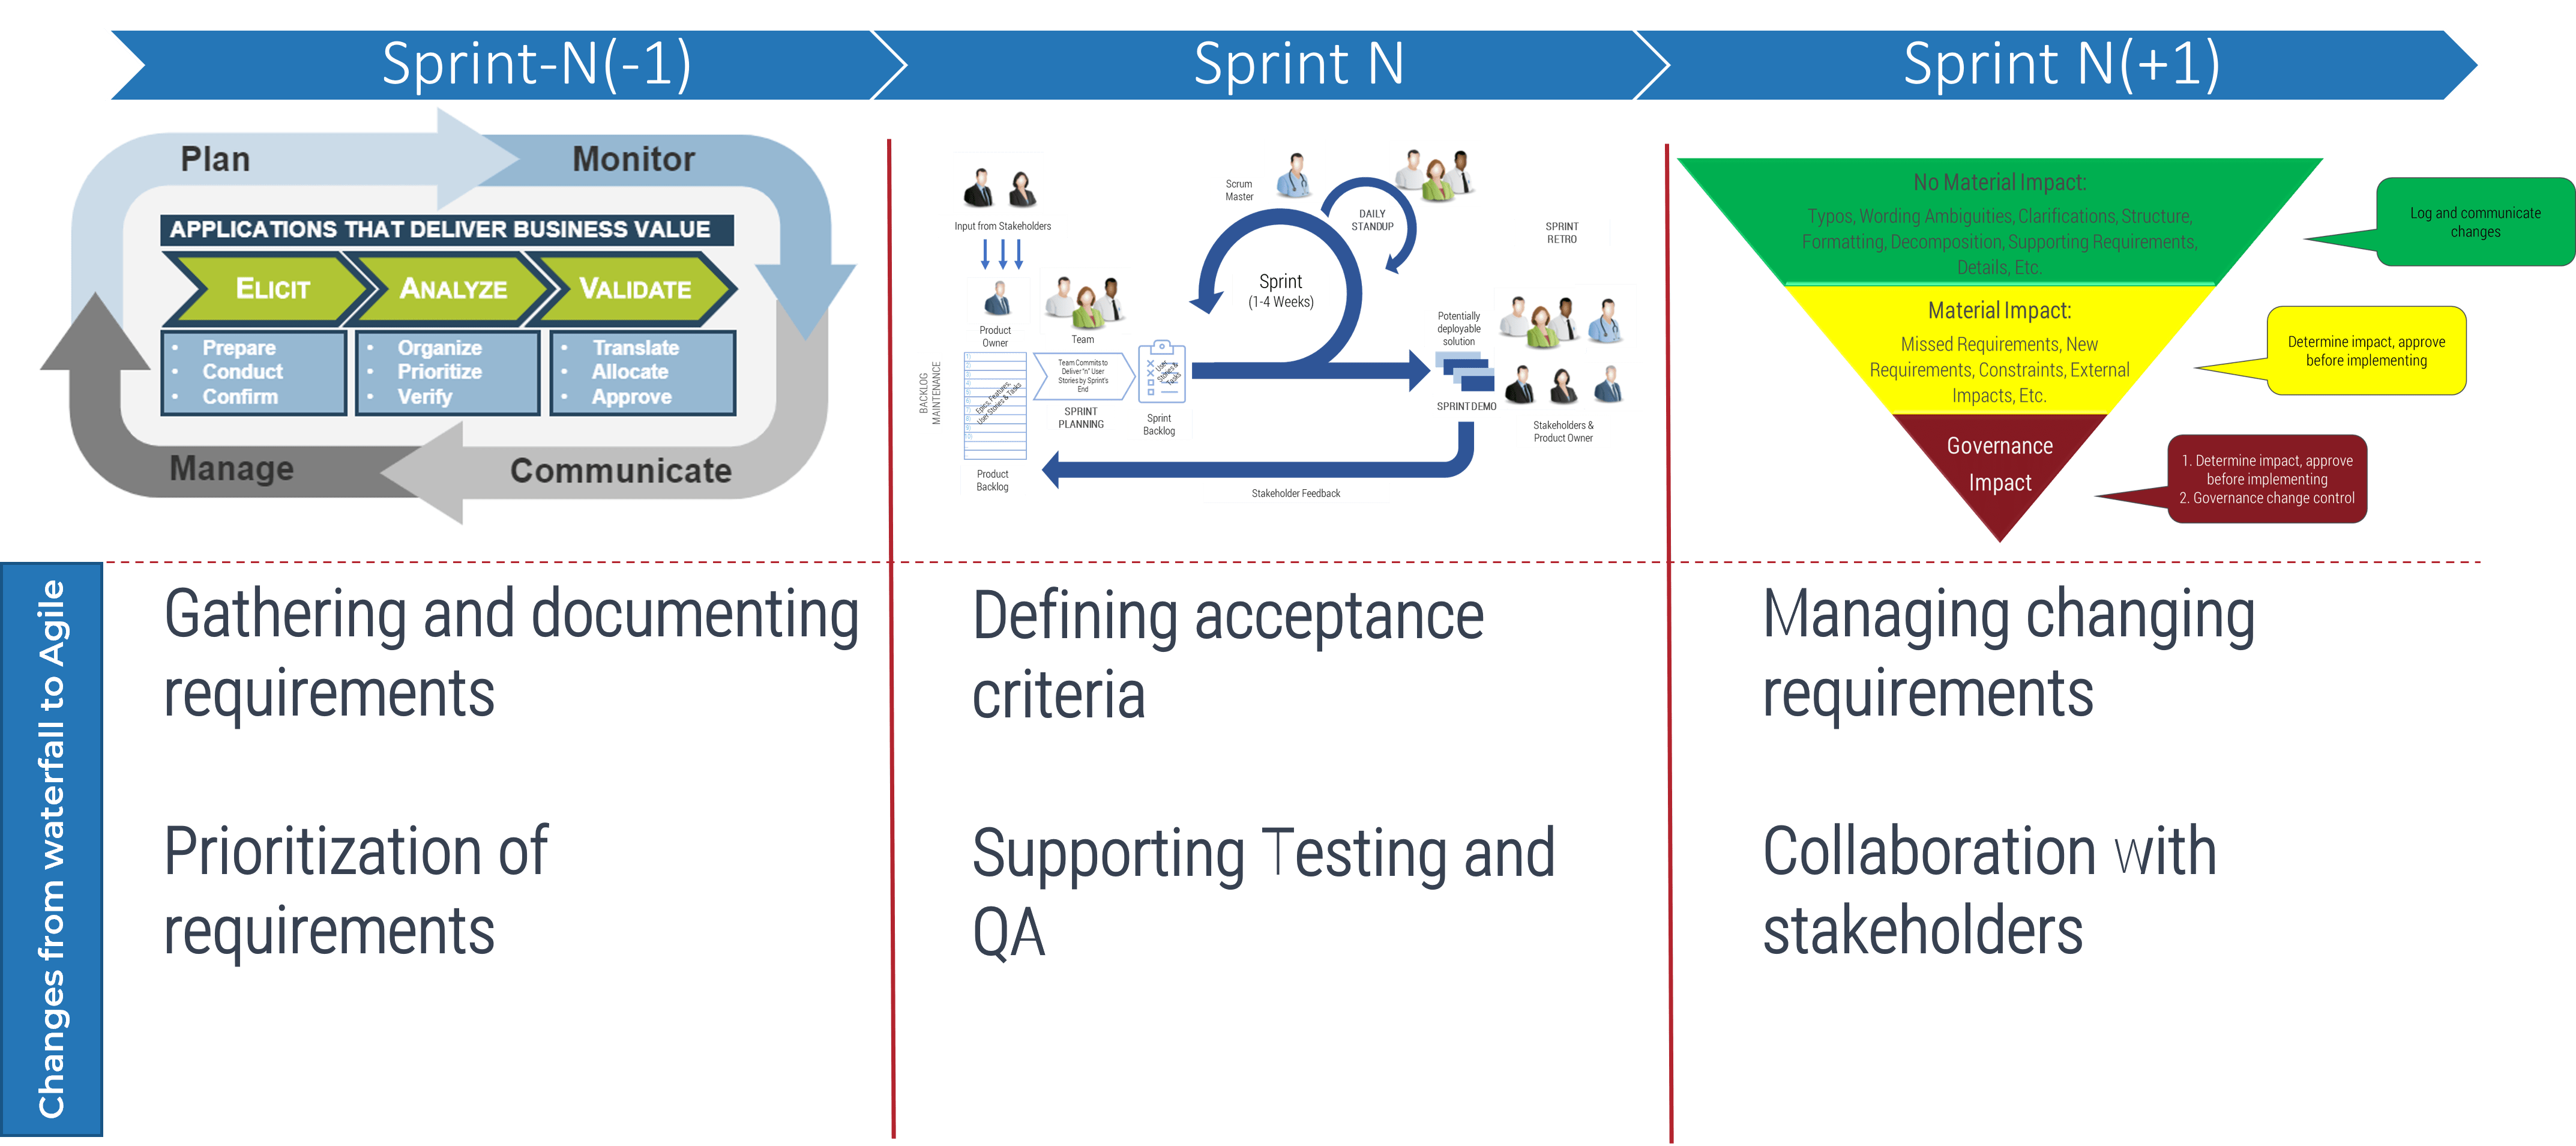 This is an image of Info-Tech's Agile requirements framework.  The three main categories are: Sprint N(-1); Sprint N; Sprint N(+1)